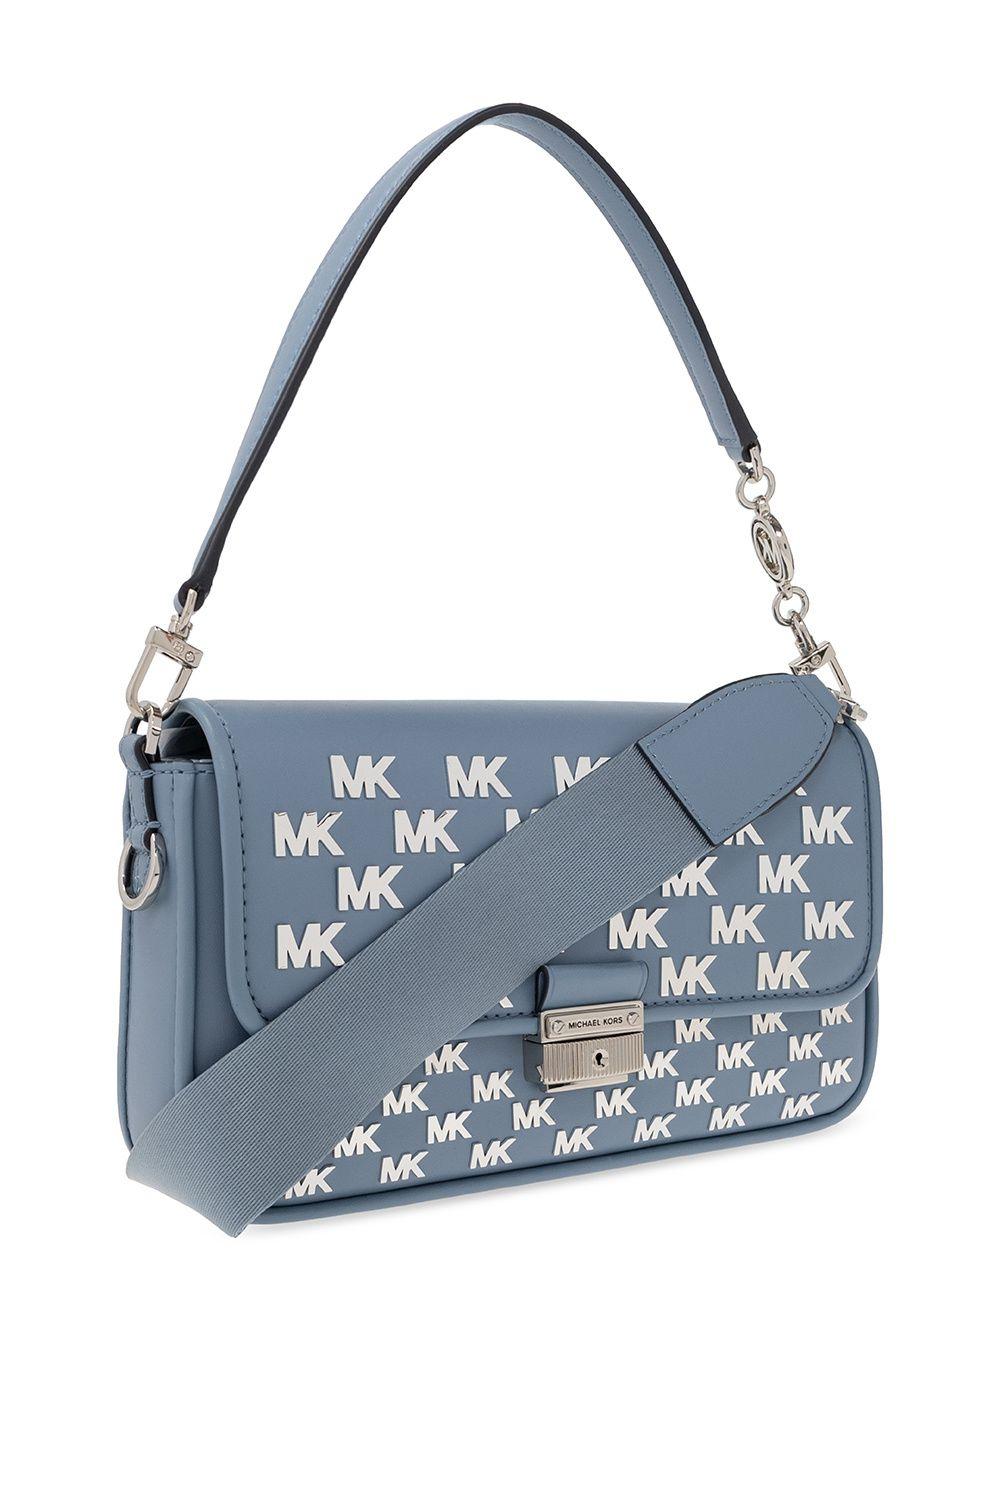 Michael Kors Pale Blue Soho Small Quilted Leather Shoulder Bag